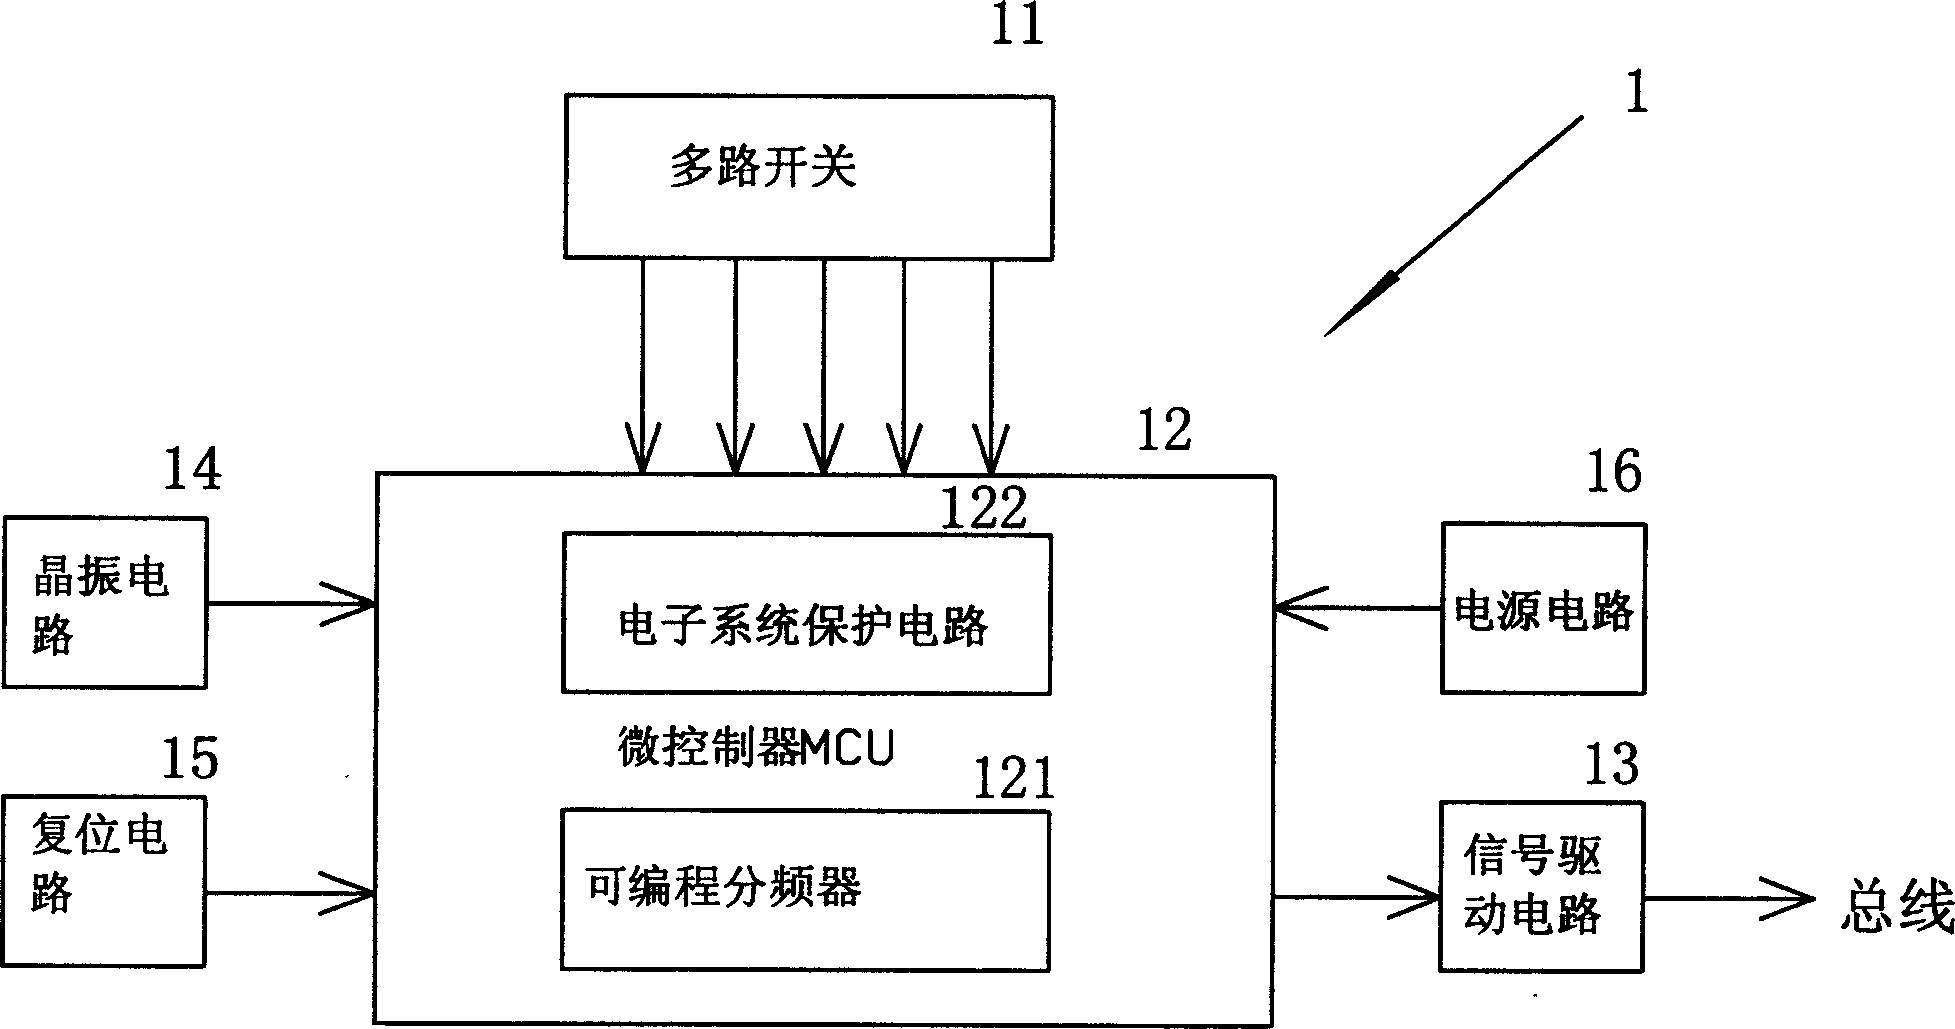 Synchronous signal telecommunication controlling system of vehicle bus